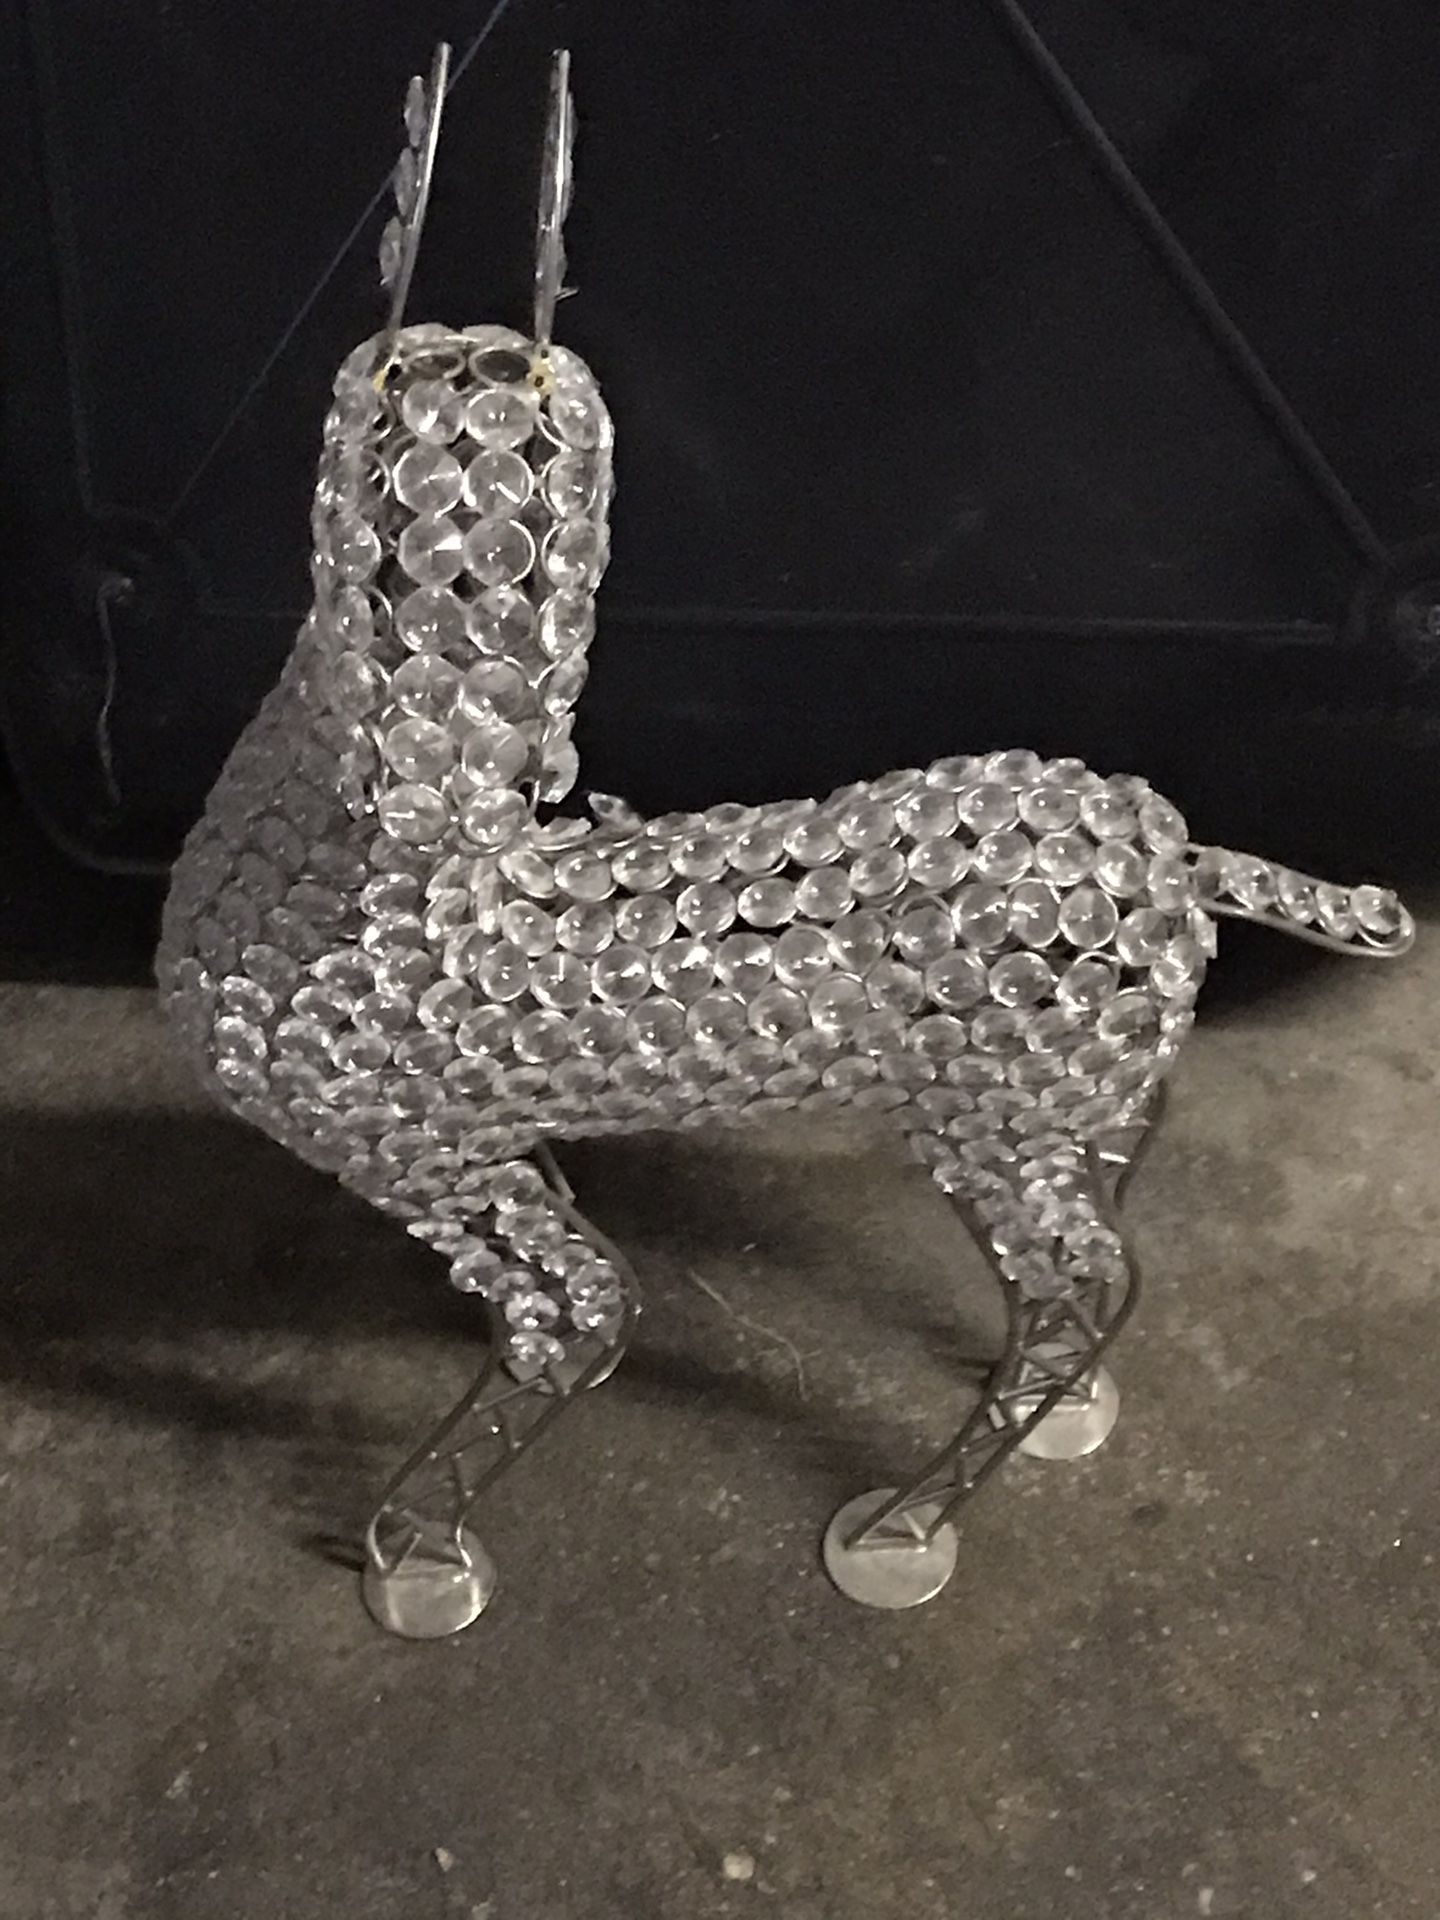 Metal Deer With Glass Decorations Around Body